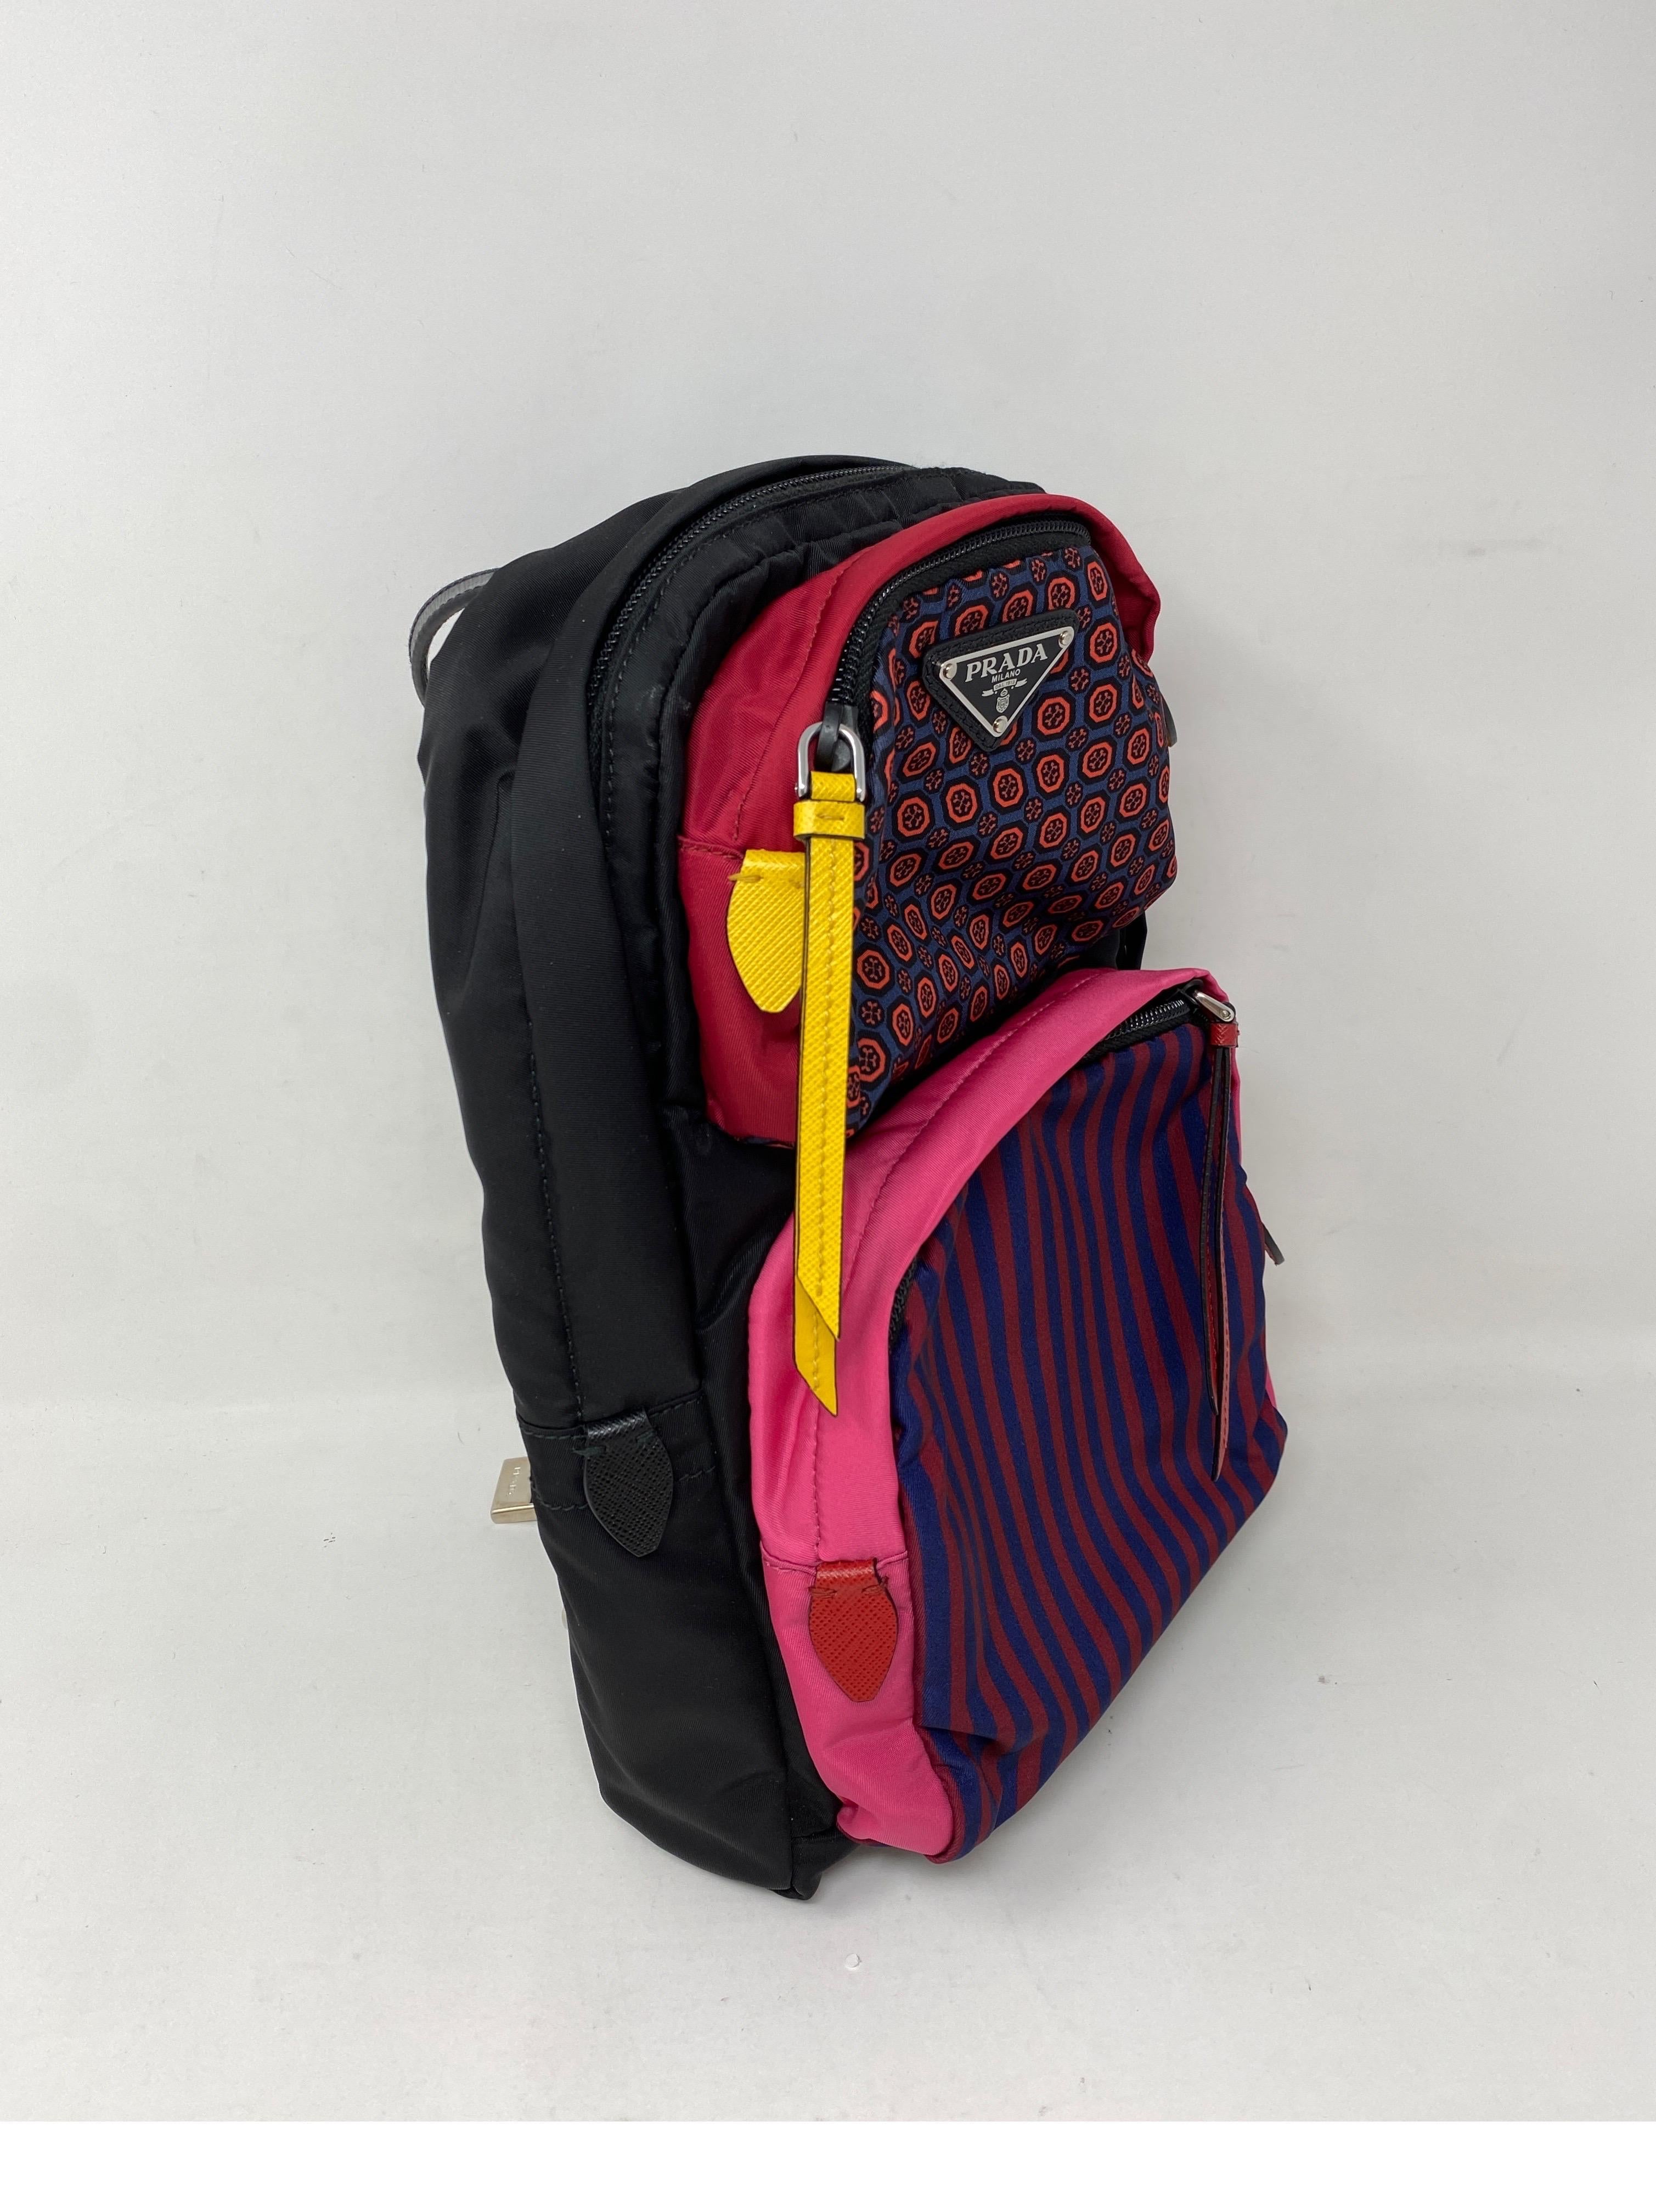 Prada Colorful Backpack. Multi color stripes detailed backpack. Black nylon back. One strap shoulder backpack. Mint like new condition. Comes with card and dust bag. Guaranteed authentic. 